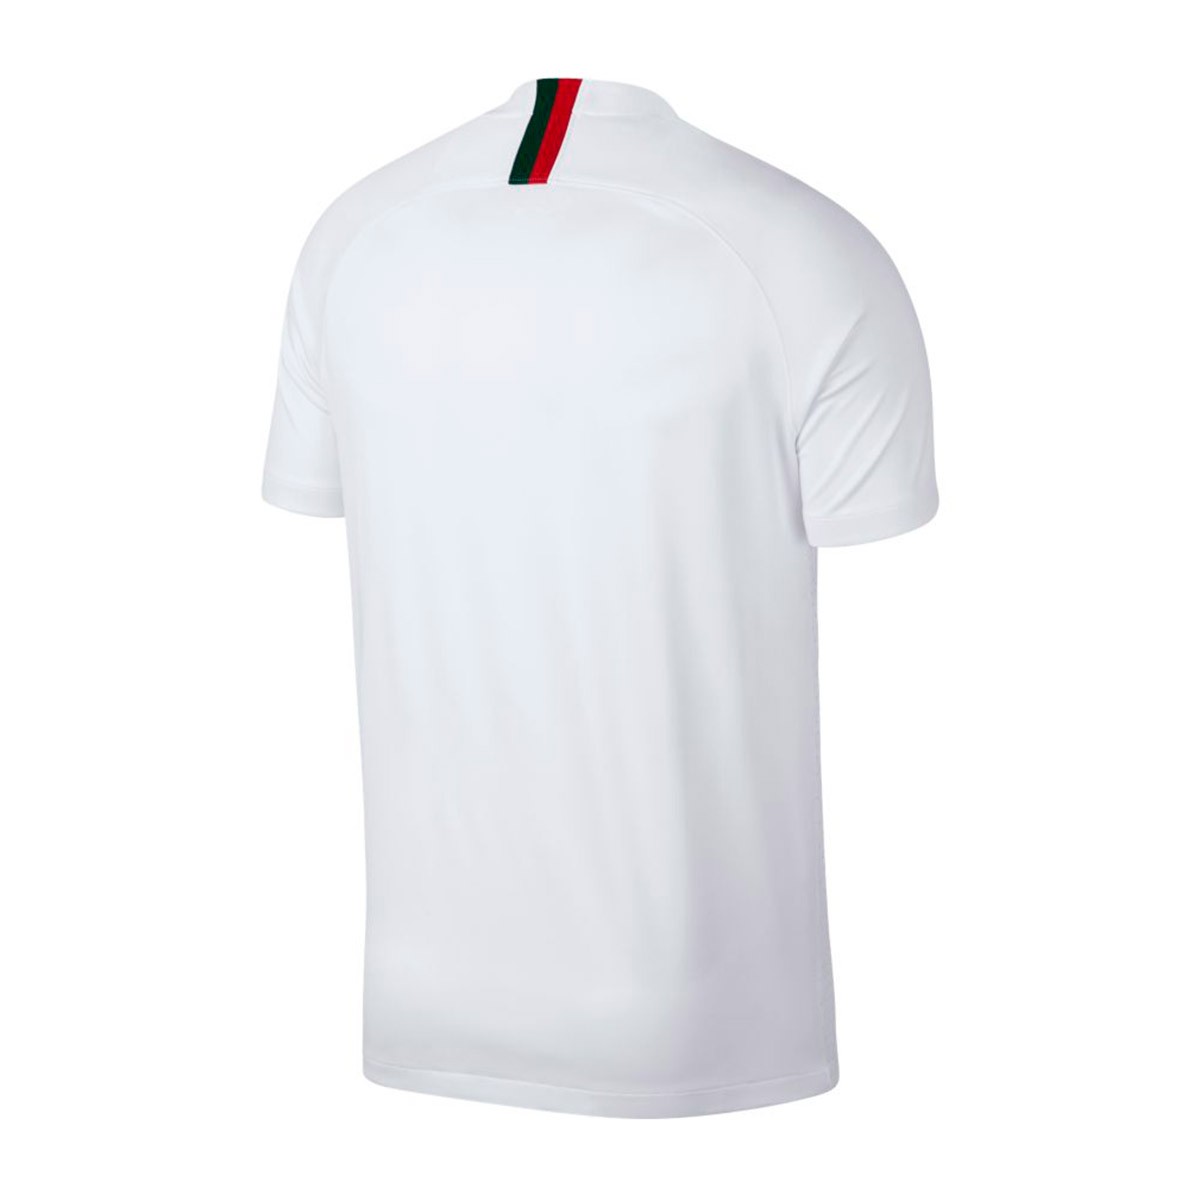 portugal jersey white